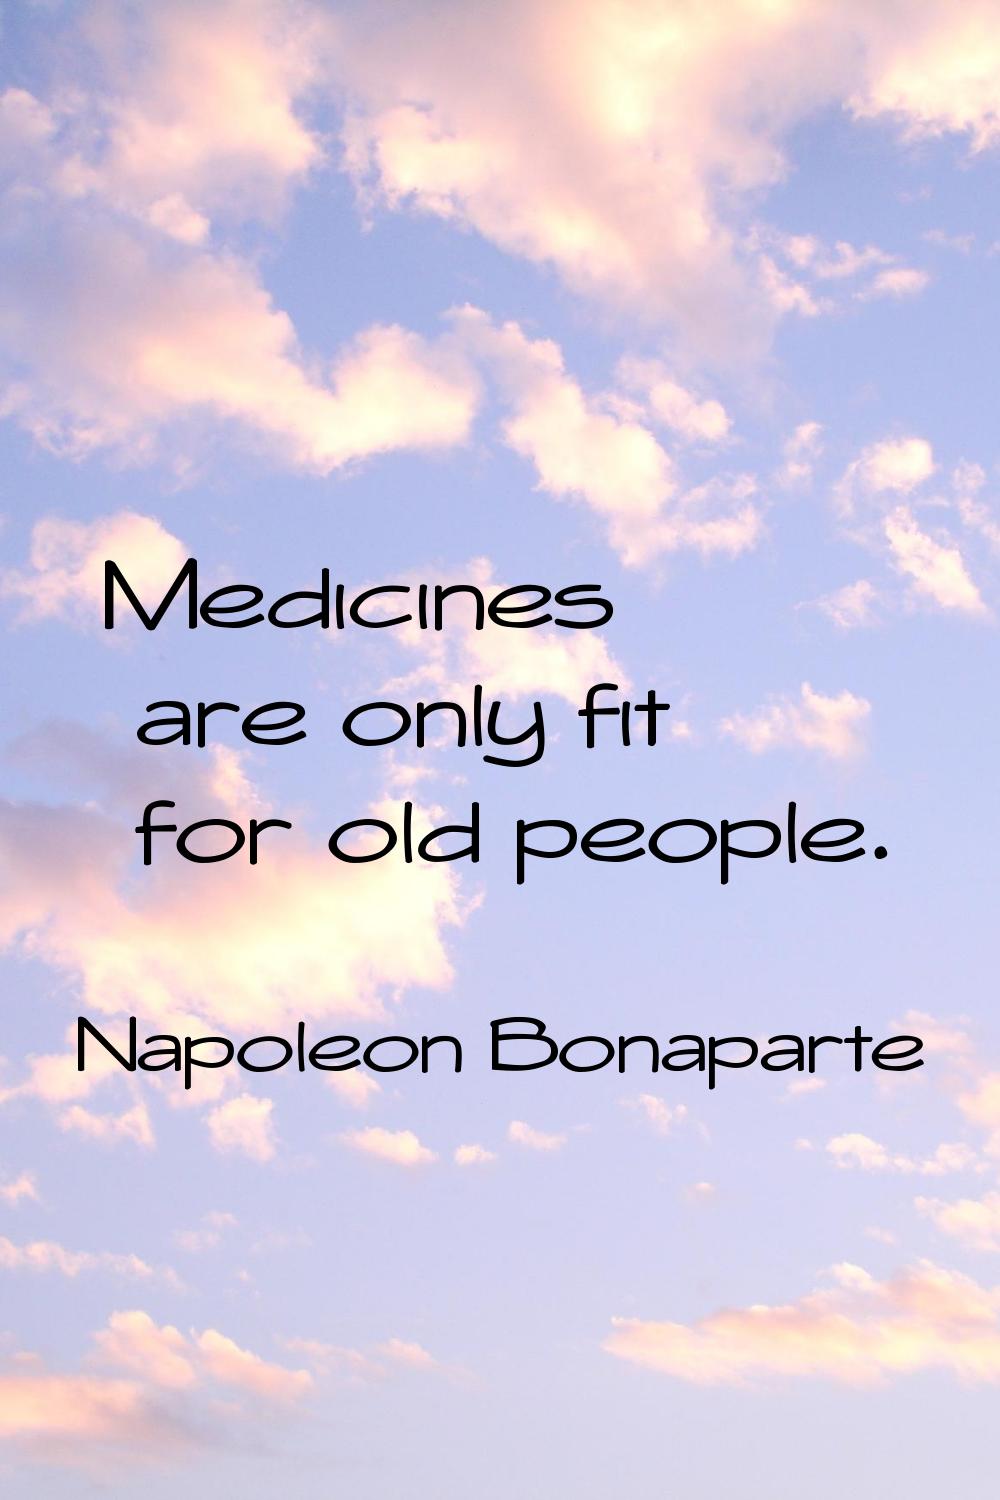 Medicines are only fit for old people.